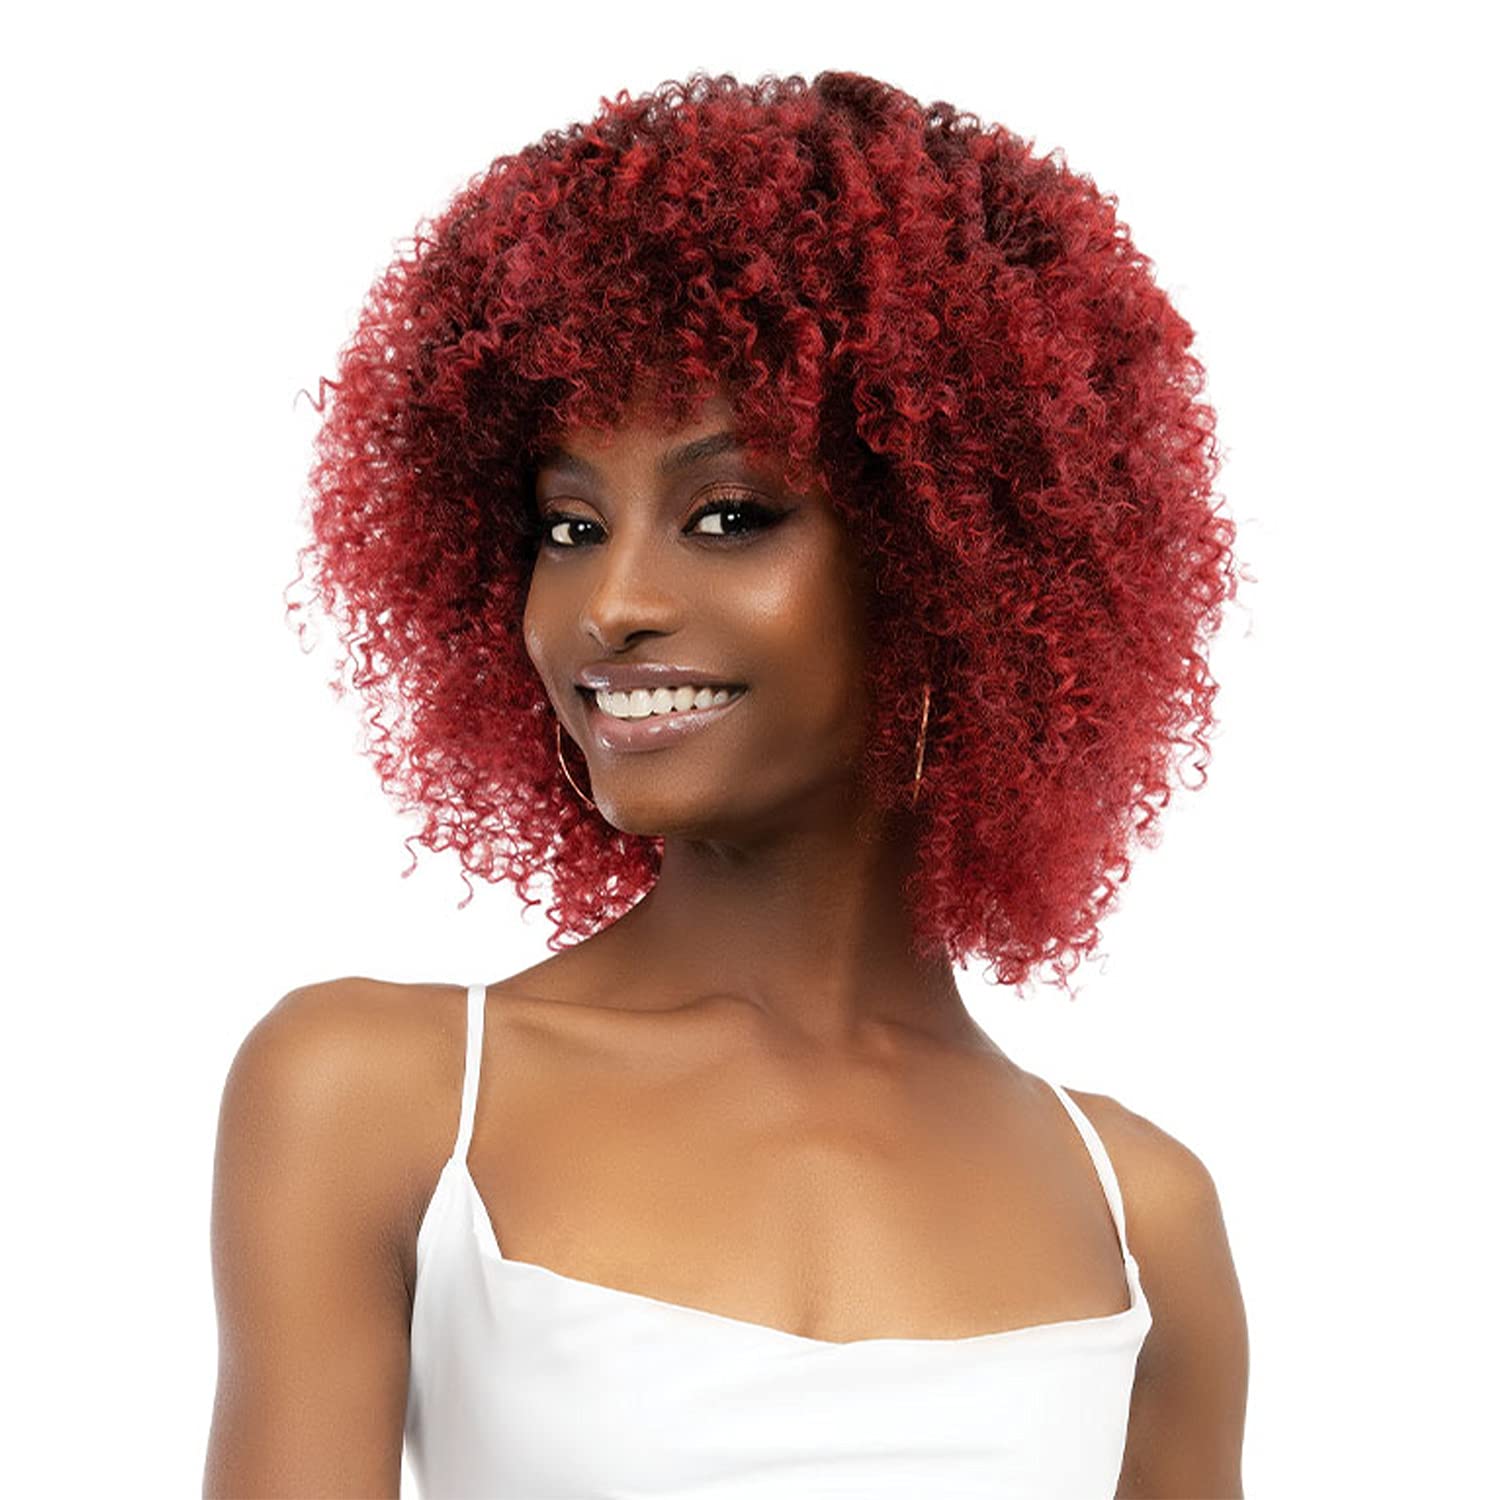 JANET NATURAL AFRO LEON WIG